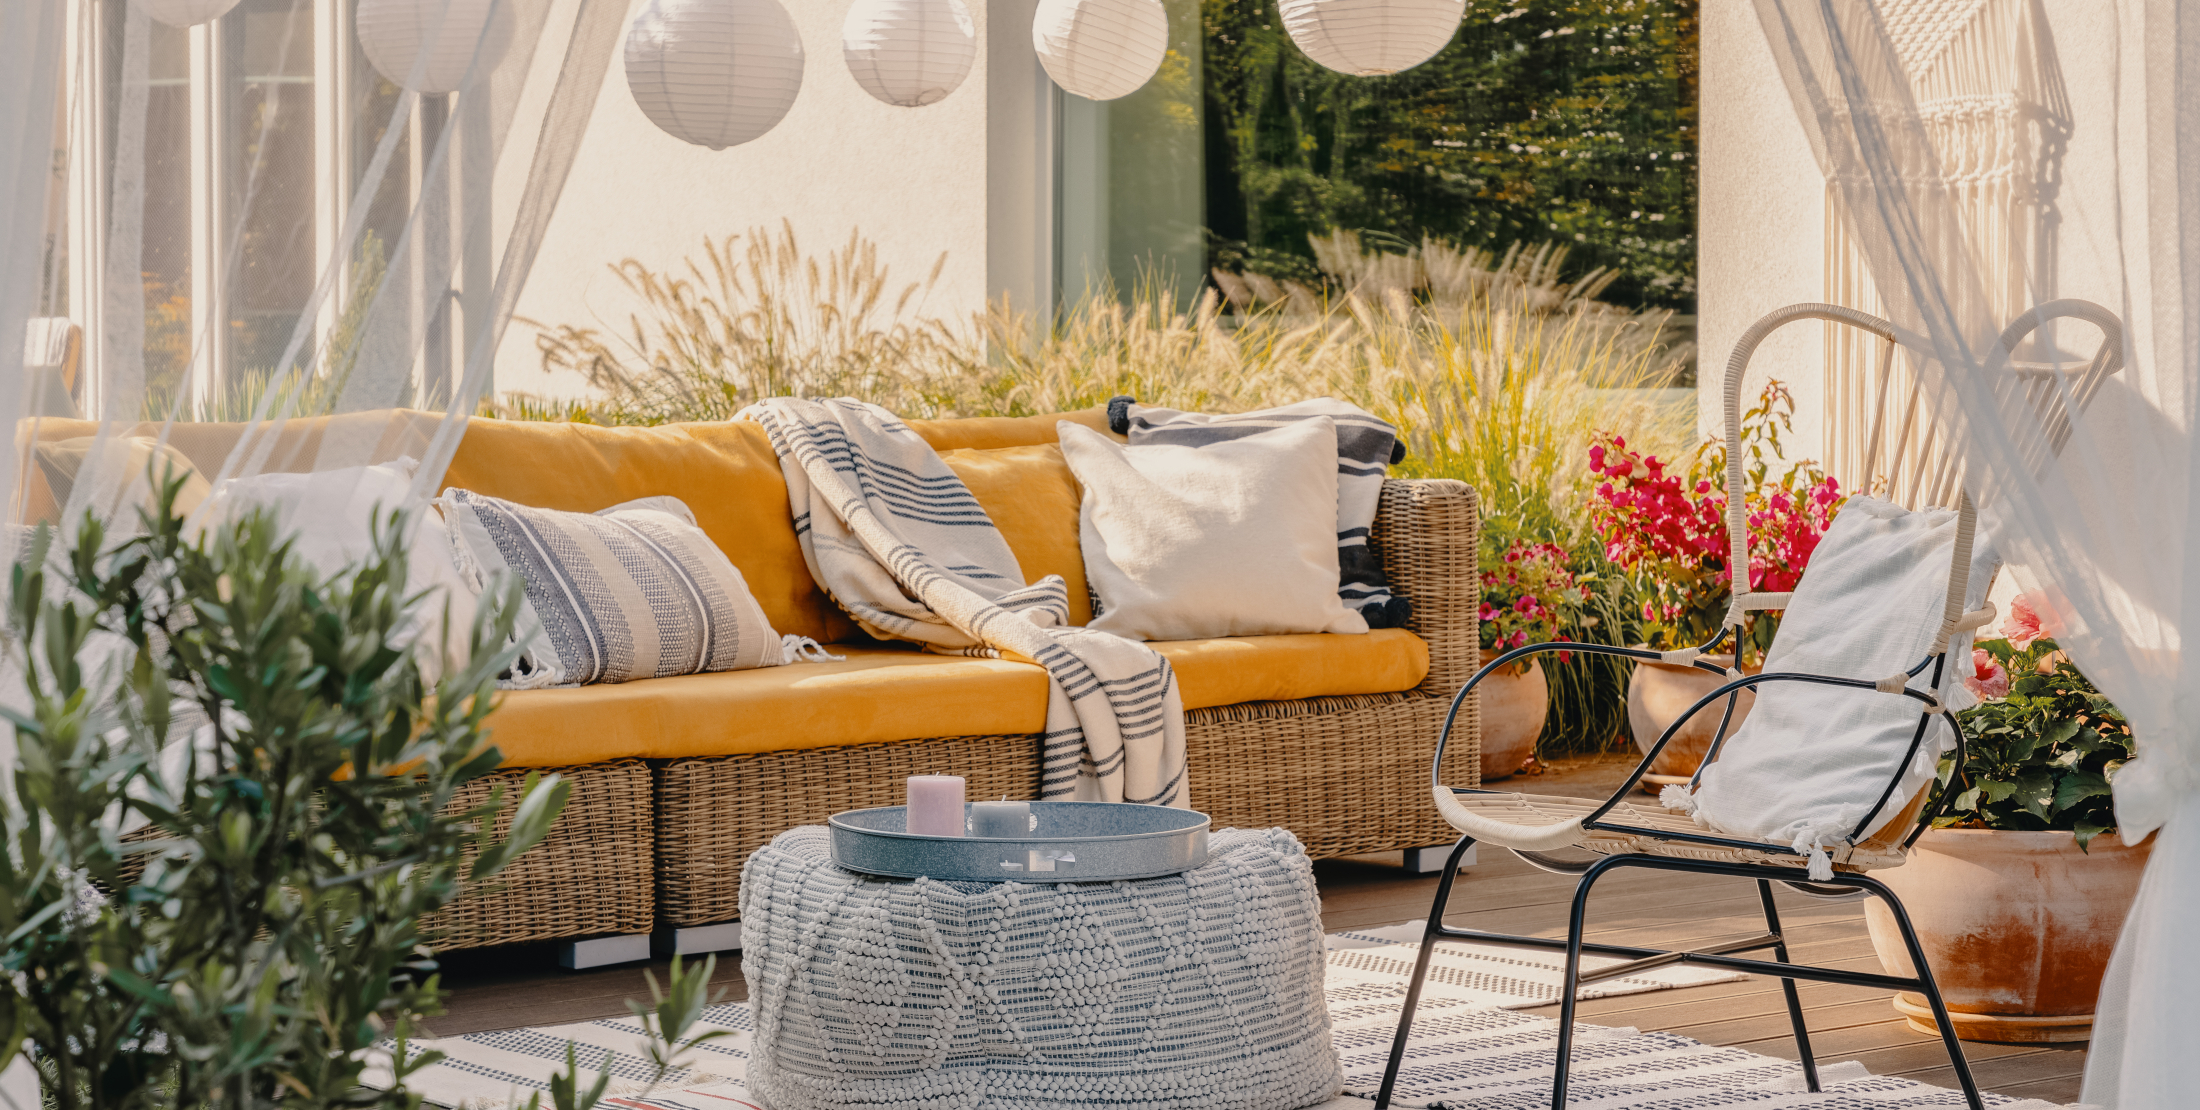 13 Summer Decor Ideas to Make Your Home Feel Cool and Fresh